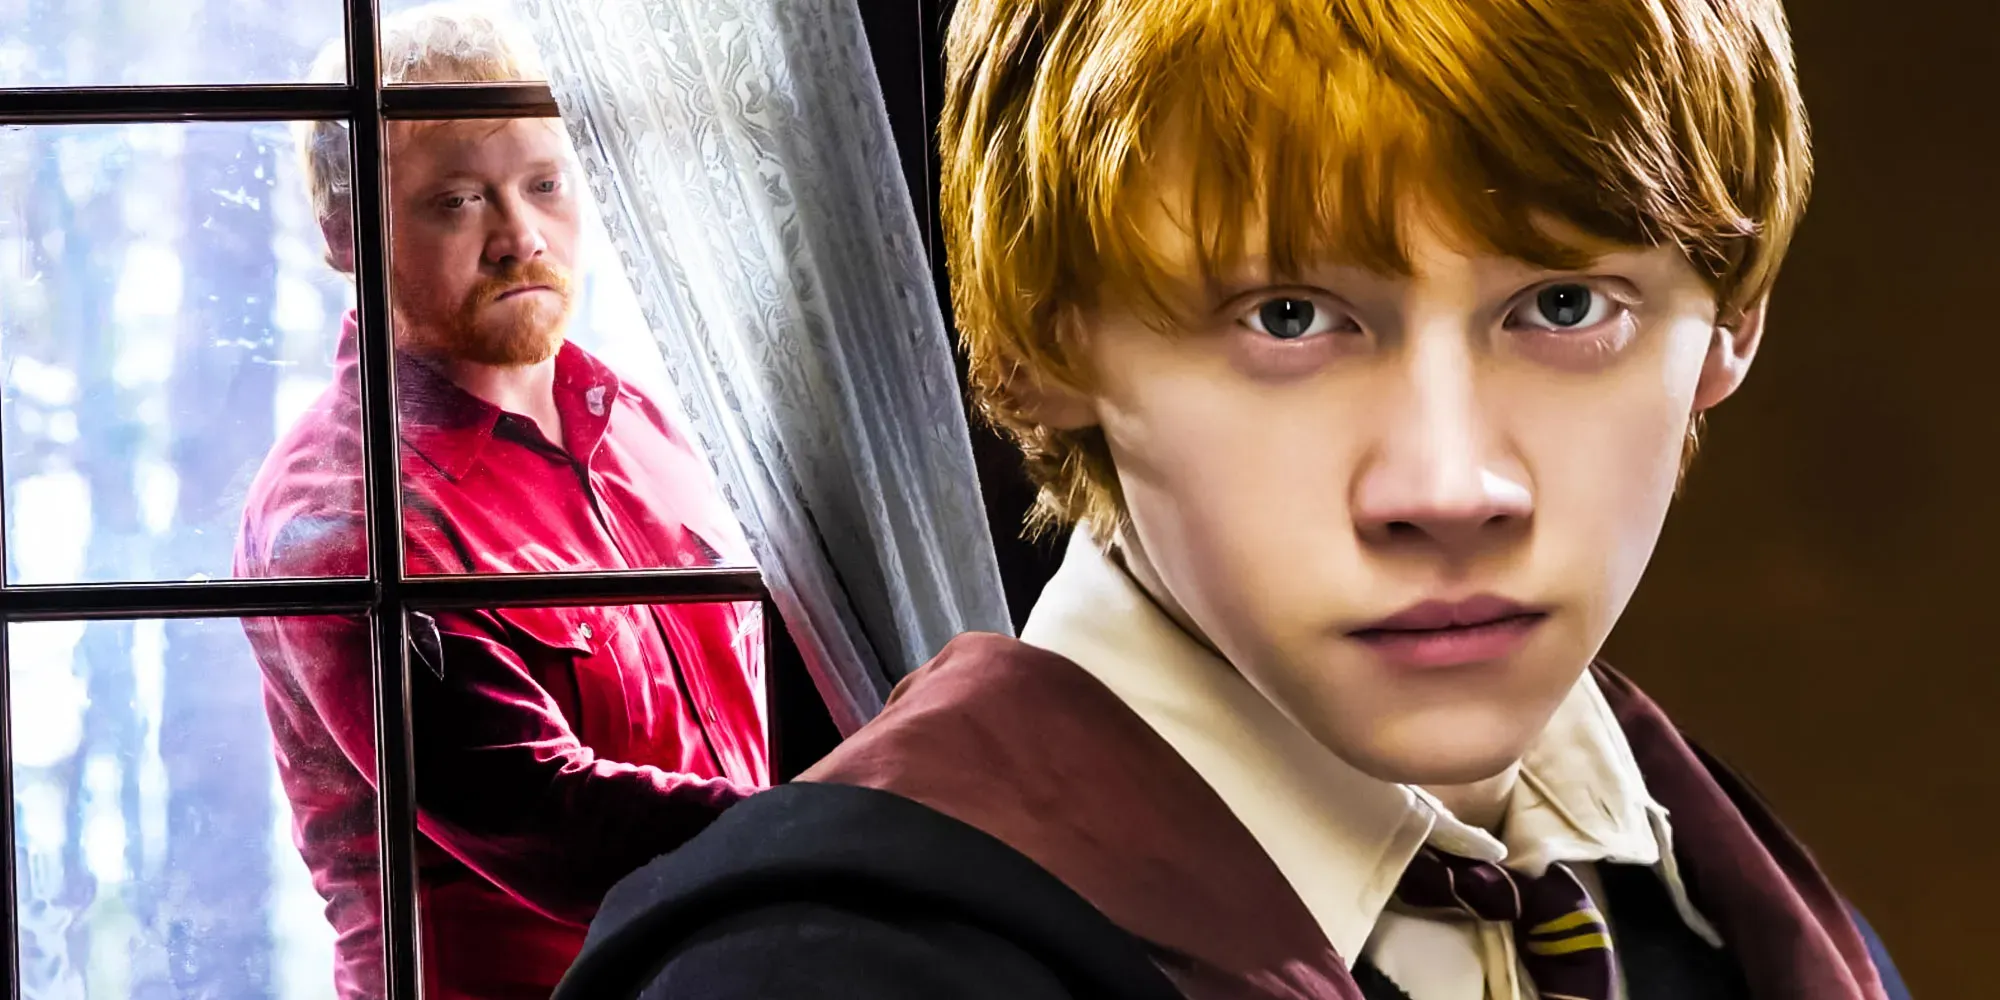 Rupert Grint says playing Ron Weasley in Harry Potter was